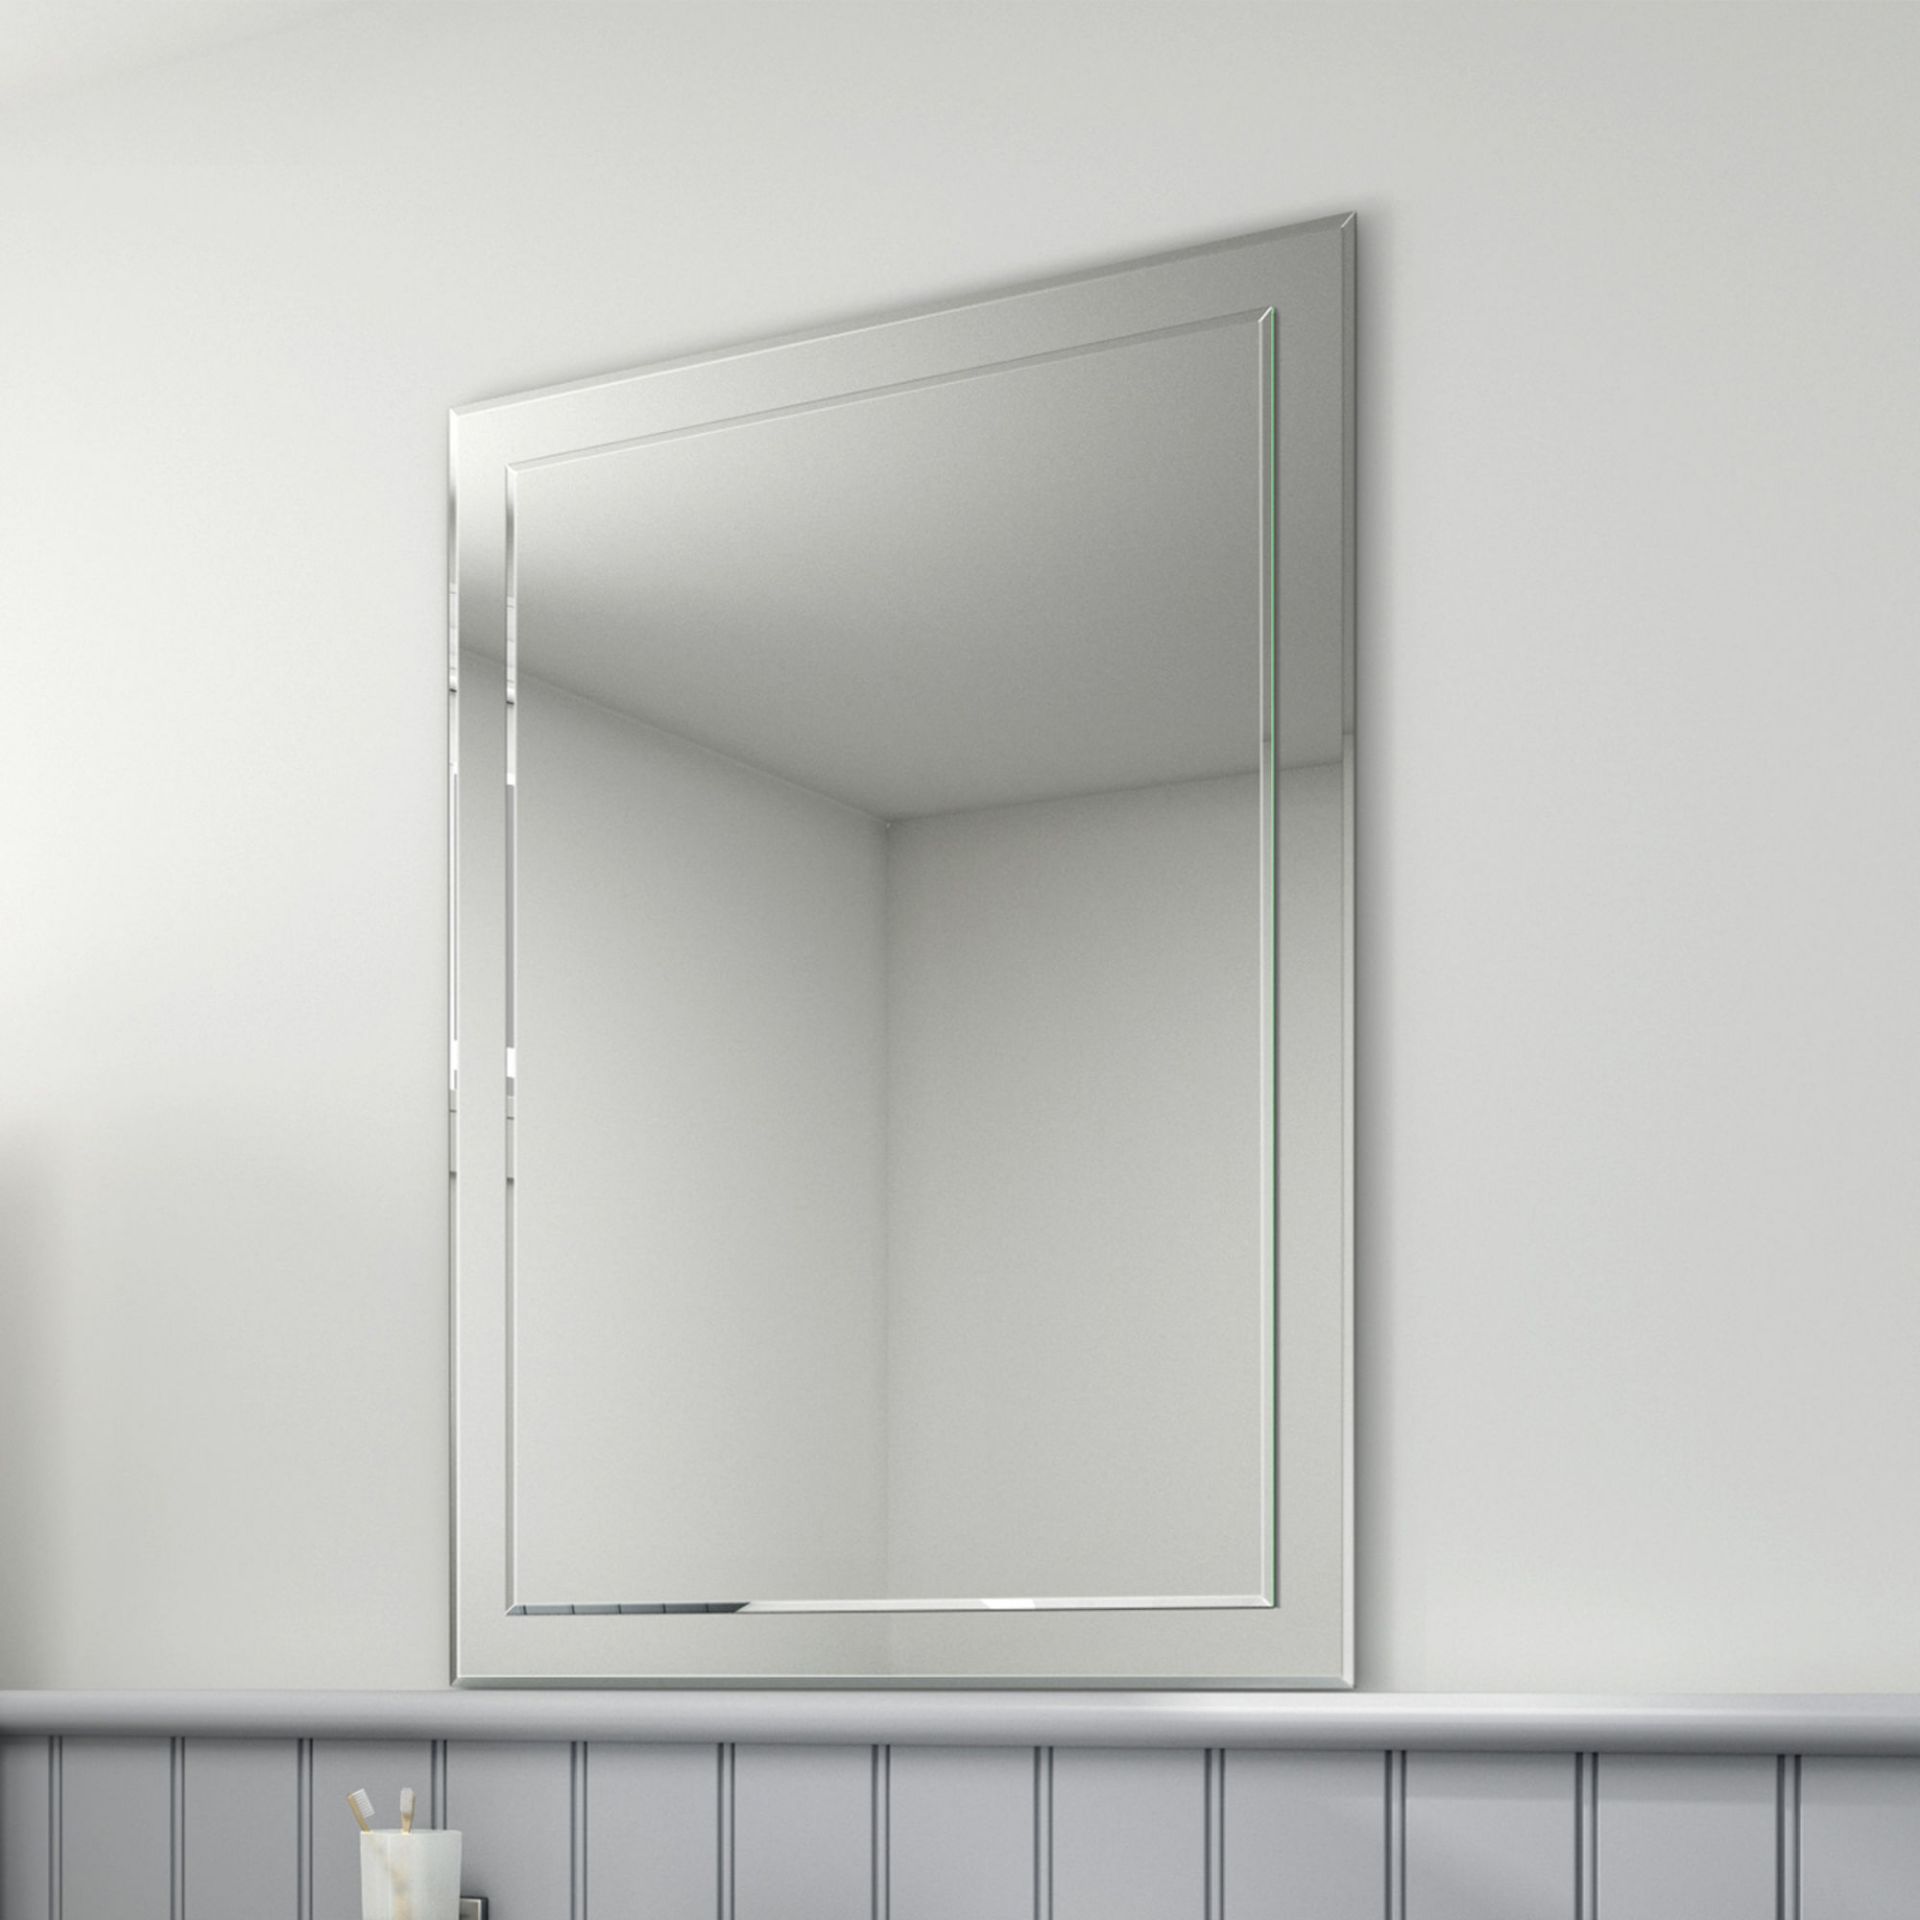 (DK151) 900x650mm Bevel Mirror. Smooth beveled edge for additional safety and style Supplied fully